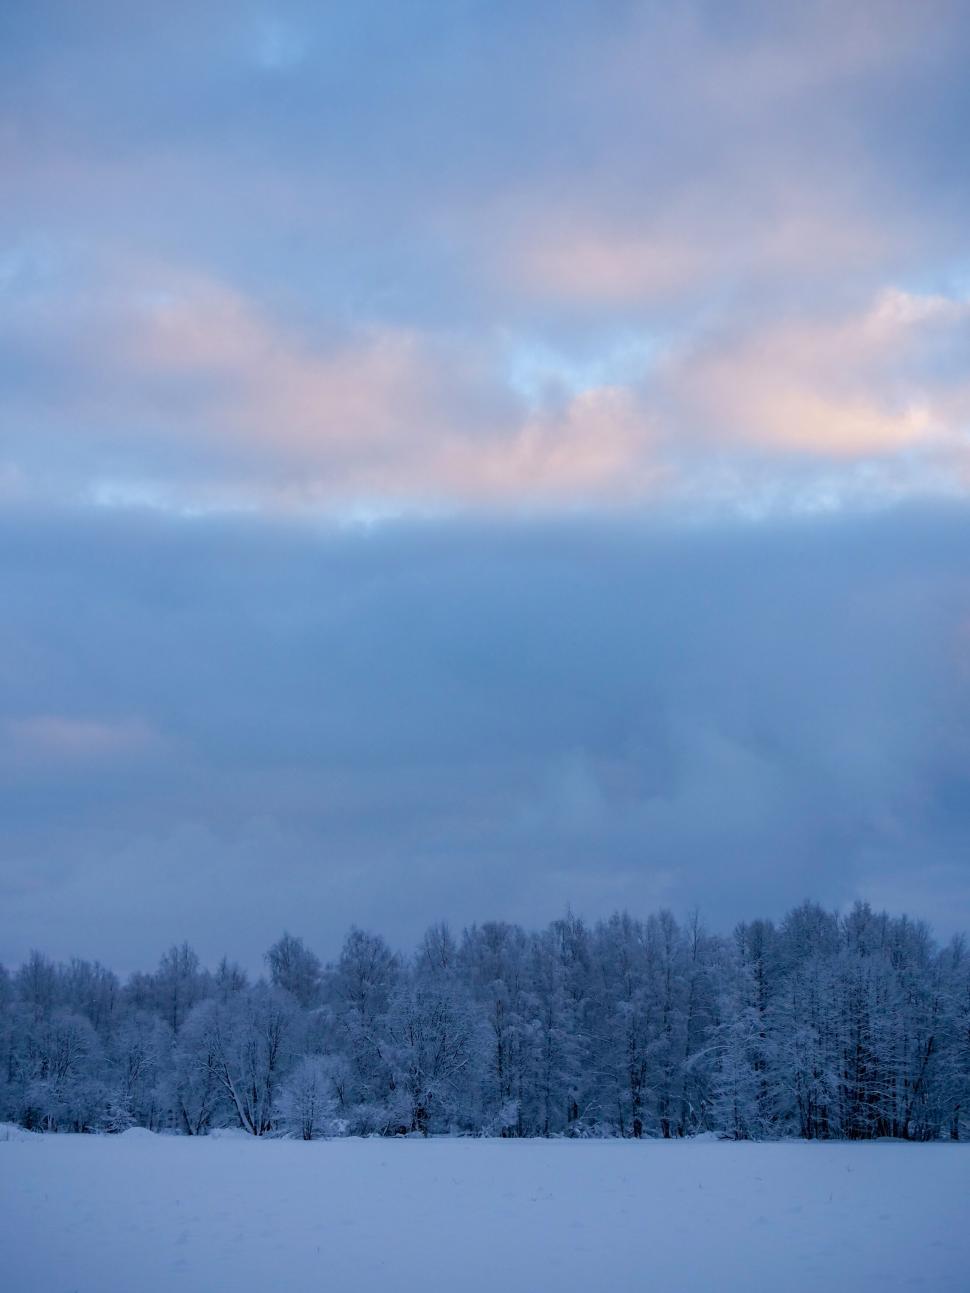 Free Image of Winter landscape with snow-covered trees at dusk 